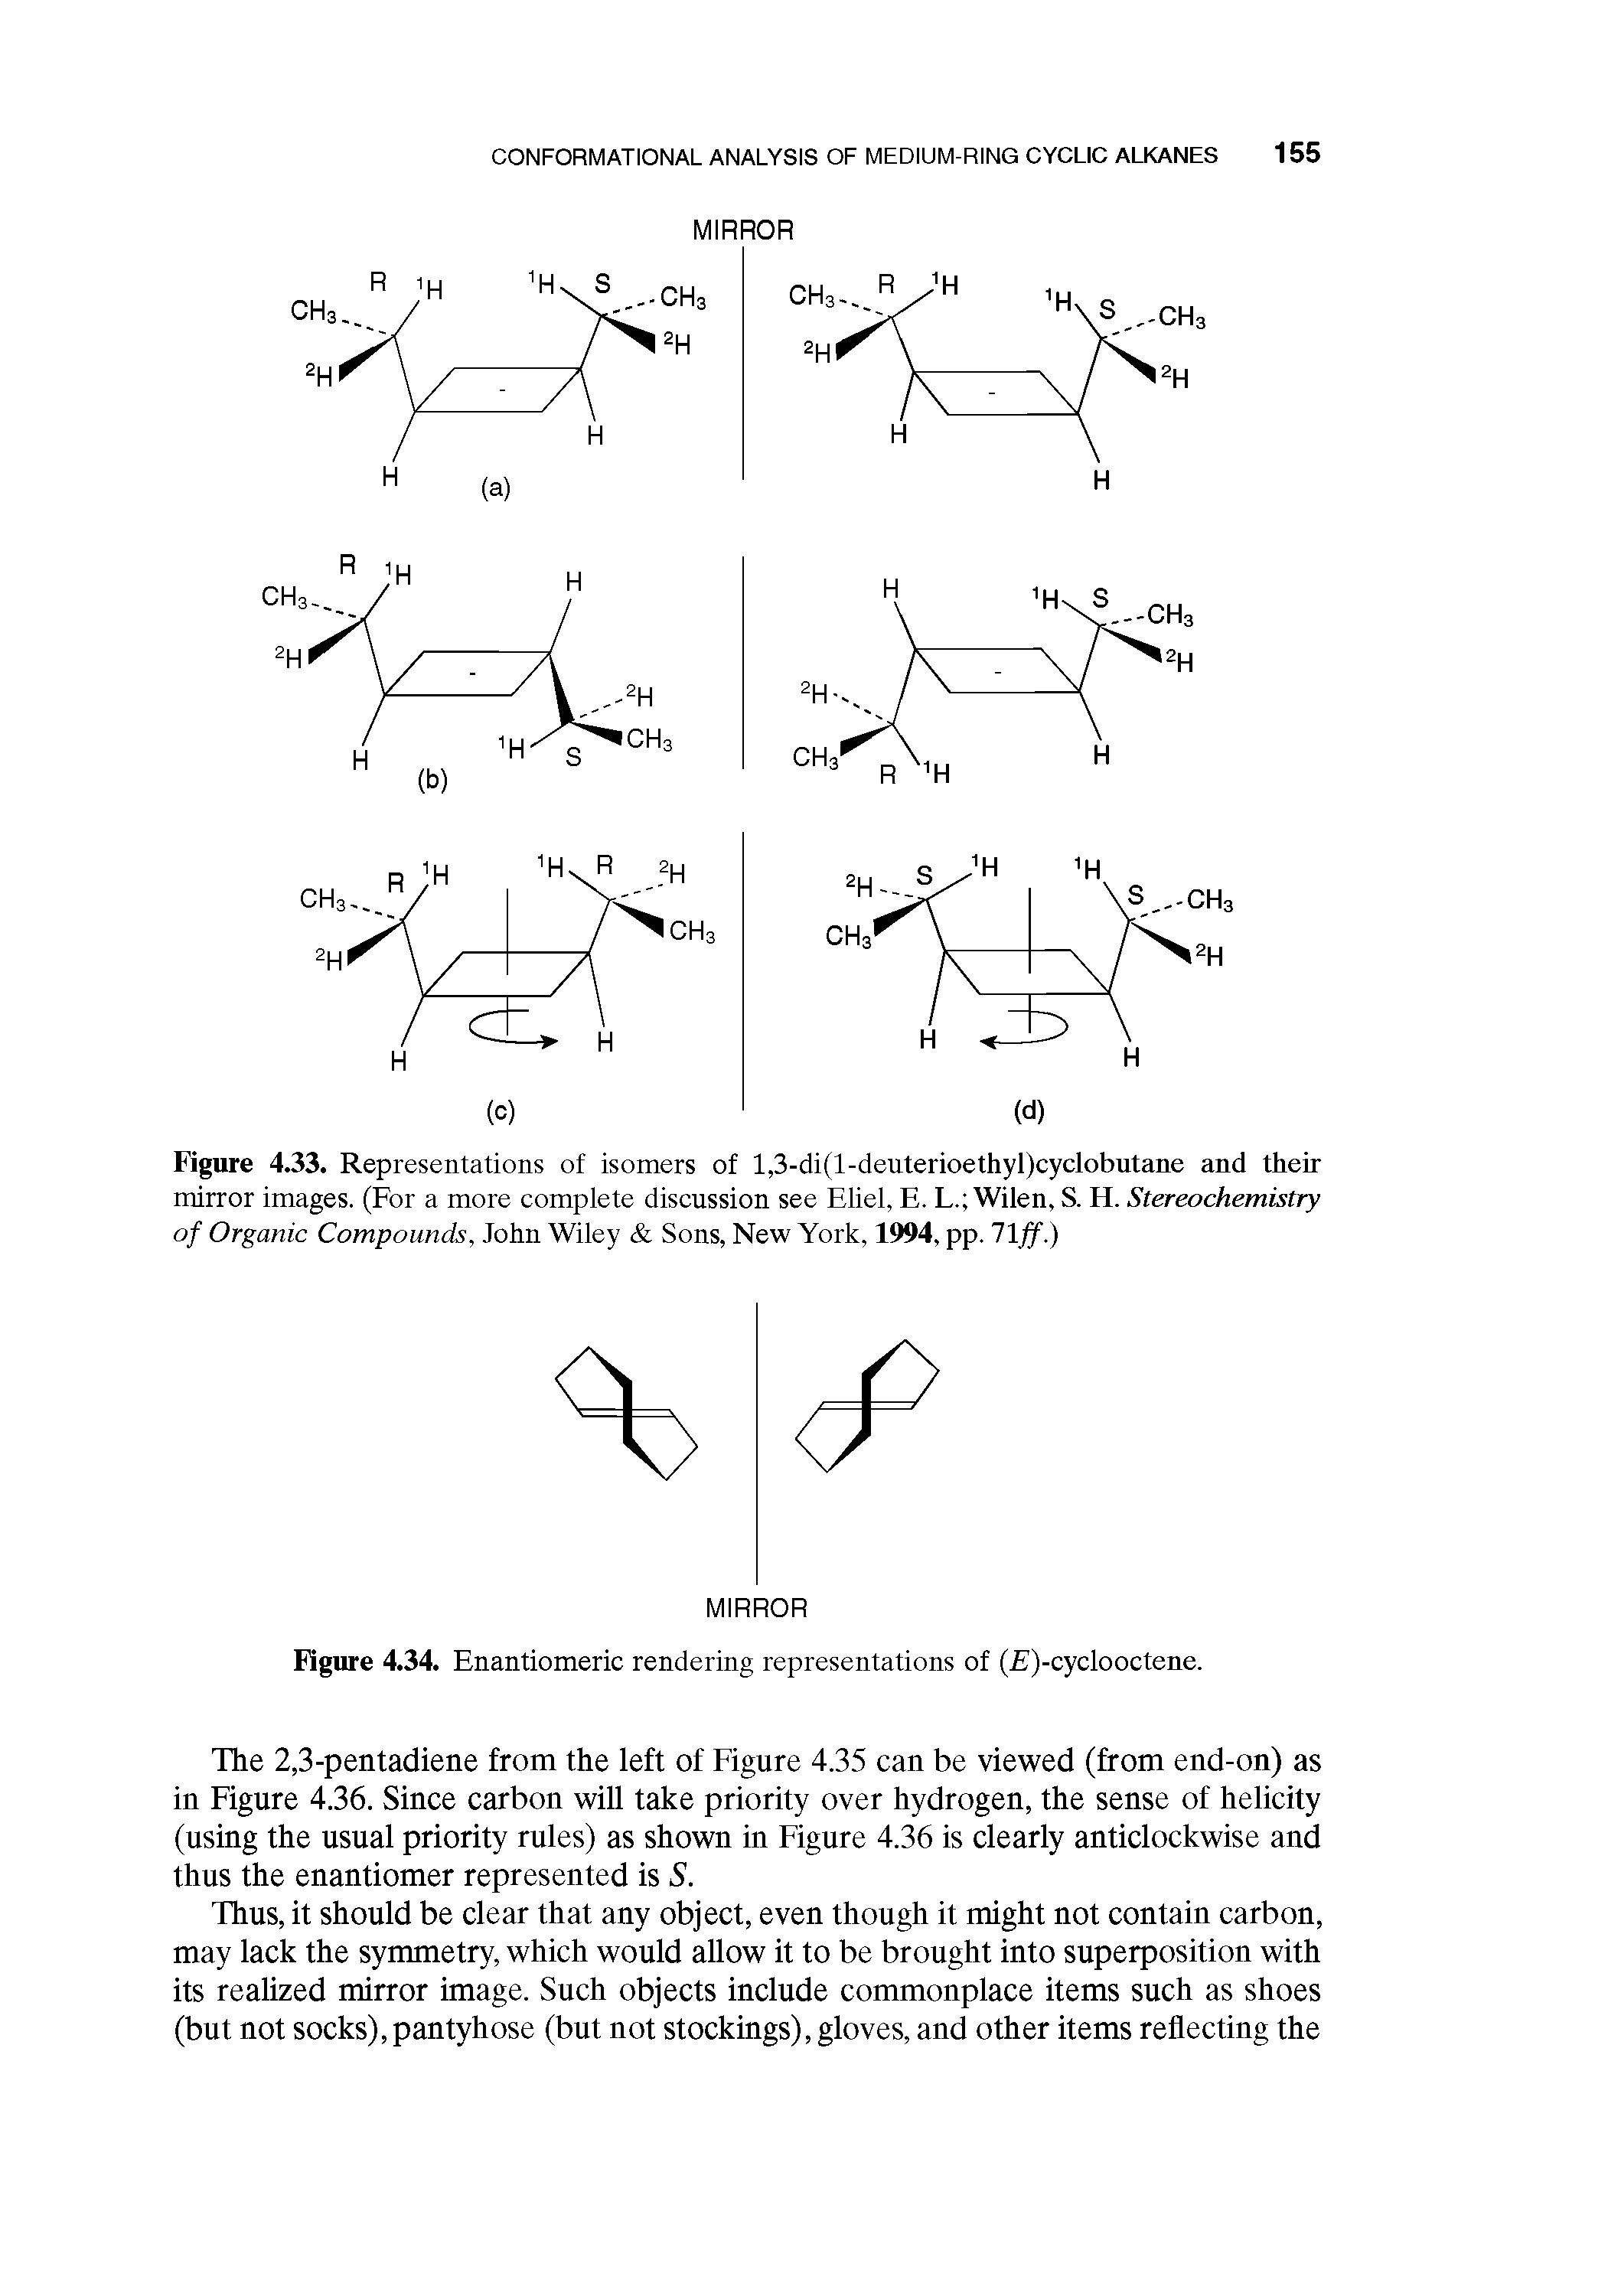 Figure 4.33. Representations of isomers of l,3-di(l-deuterioethyl)cyclobutane and their mirror images. (For a more complete discussion see EUel, E. L. Wilen, S. H. Stereochemistry of Organic Compounds, John Wiley Sons, New York, 1994, pp. T ff)...